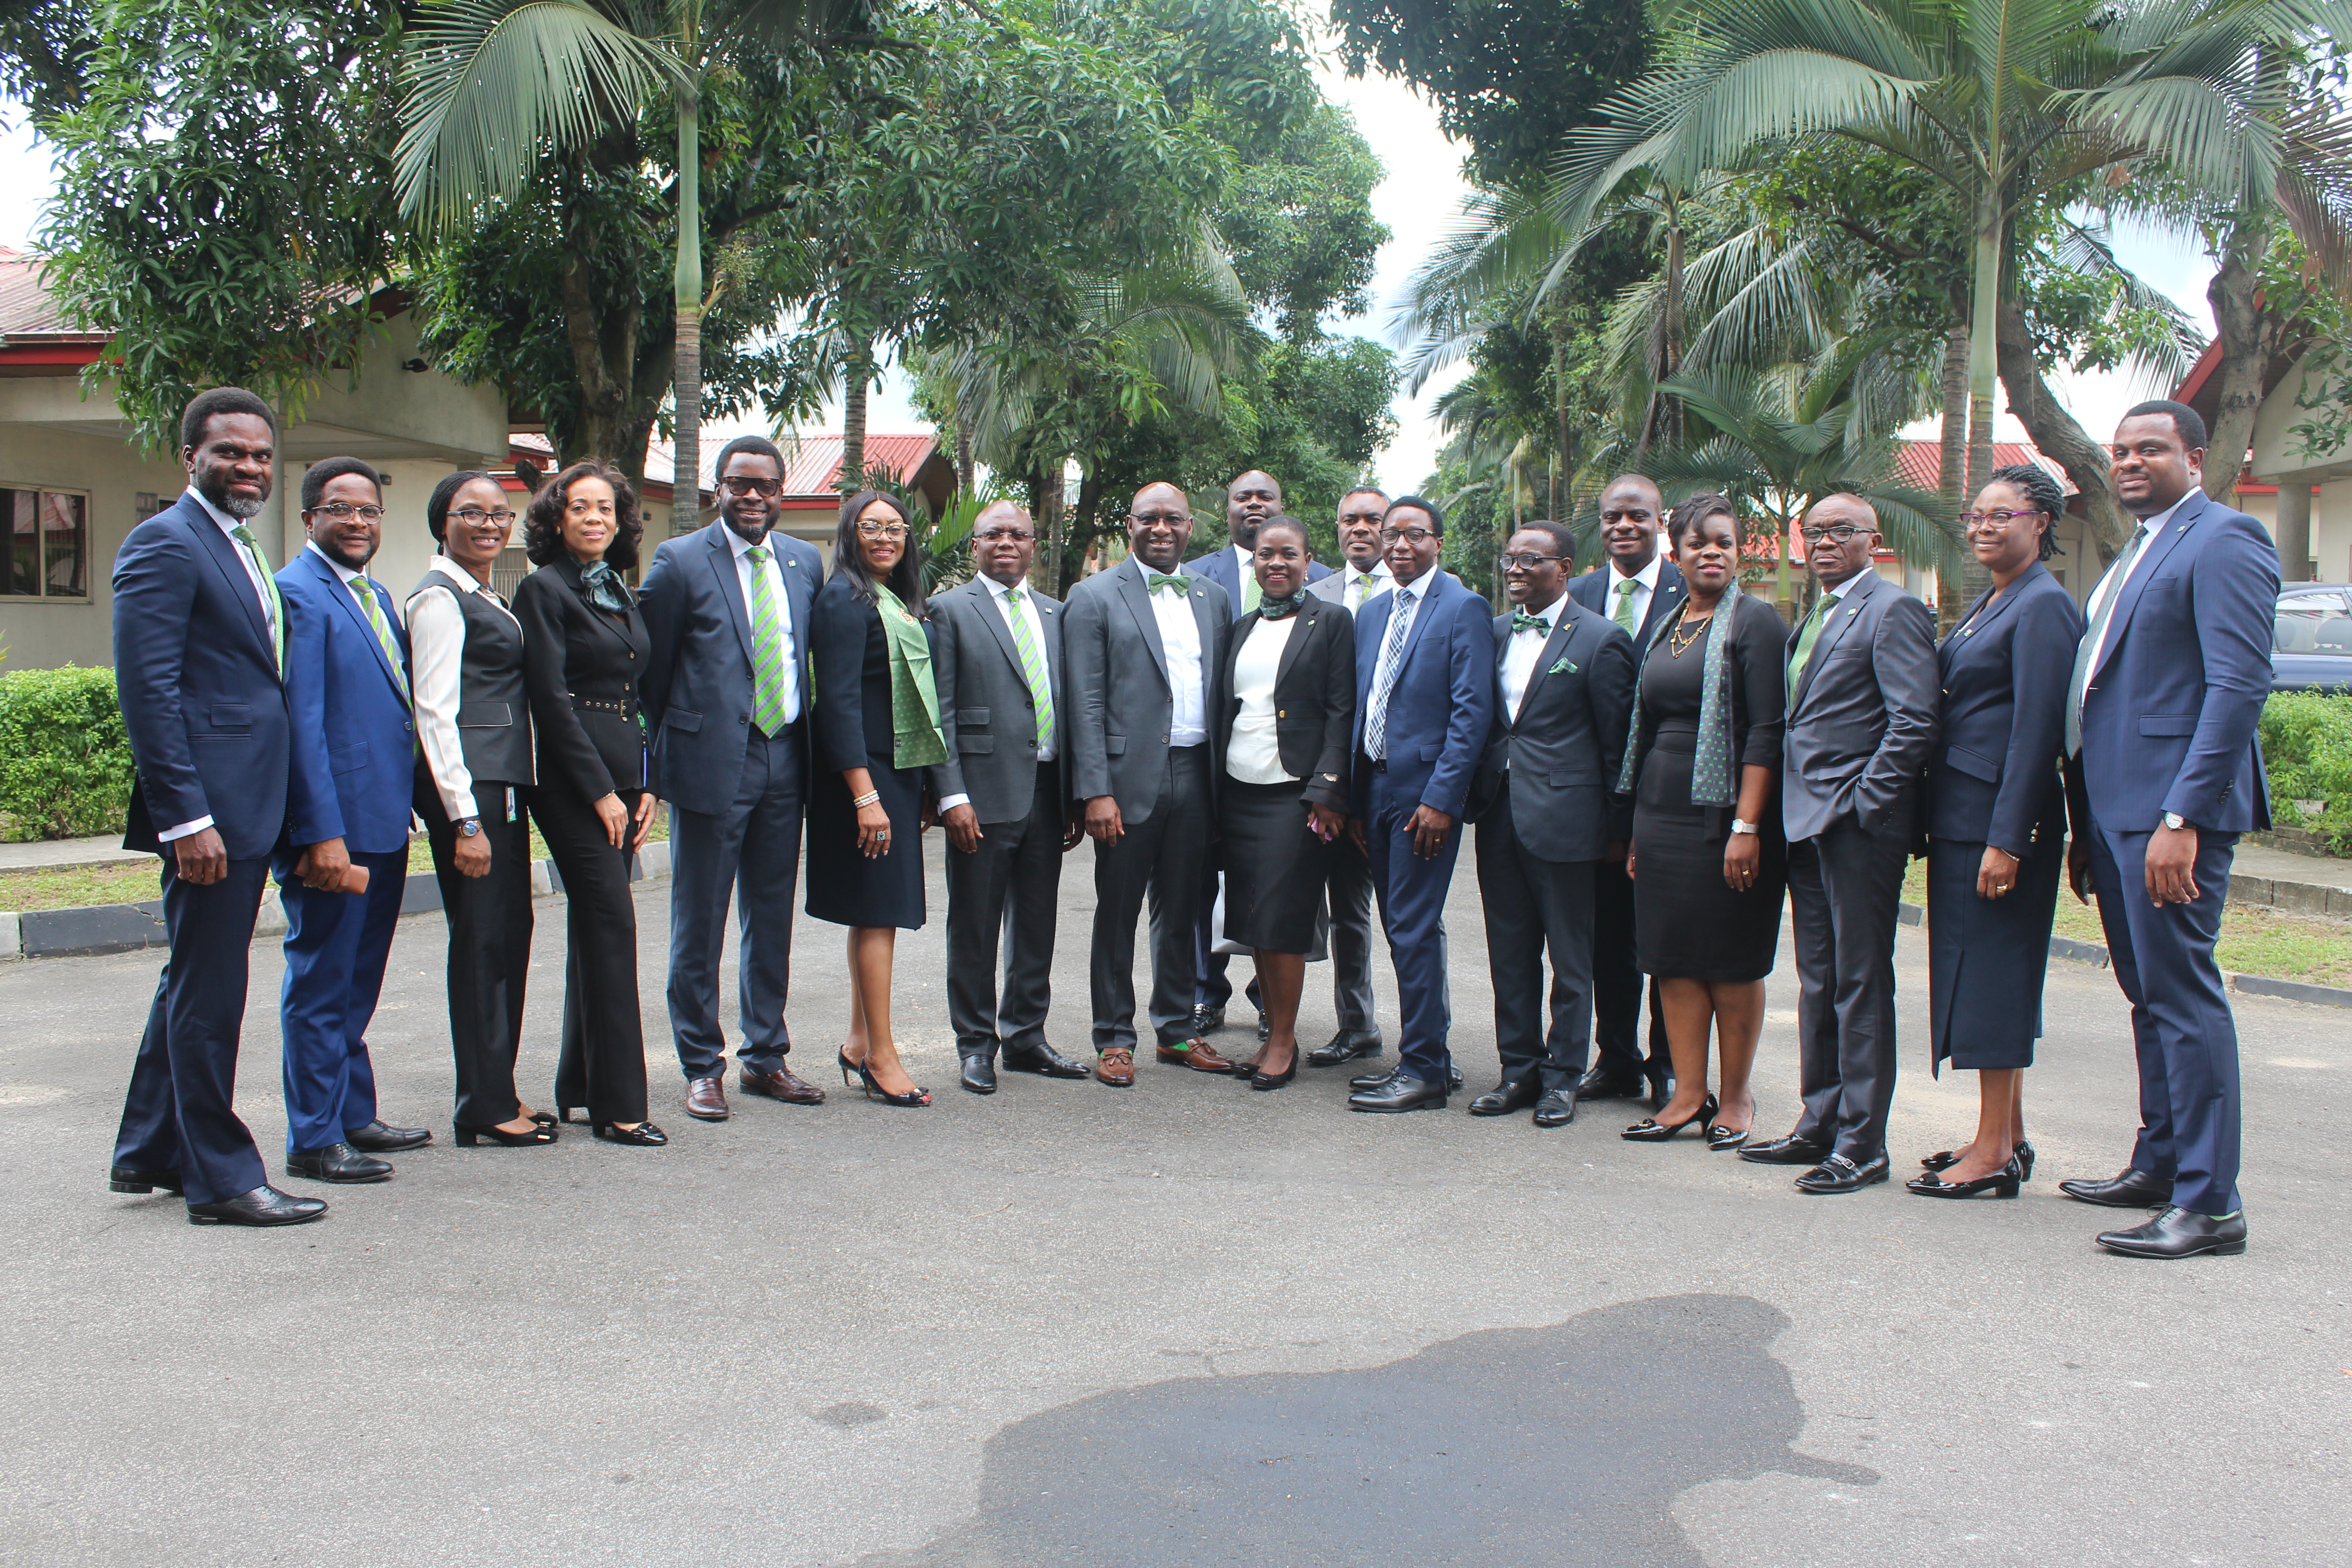 MD/CEO, Heritage Bank Plc, Ifie Sekibo (8th right sitting), Executive Director, Jude Monye (7th left), other Management staff and some of the 300 new intakes of Heritage Bank training Institute dubbed “The Refinery,” during the ushering of the intakes for 12-week intensive training course in Port Harcourt.